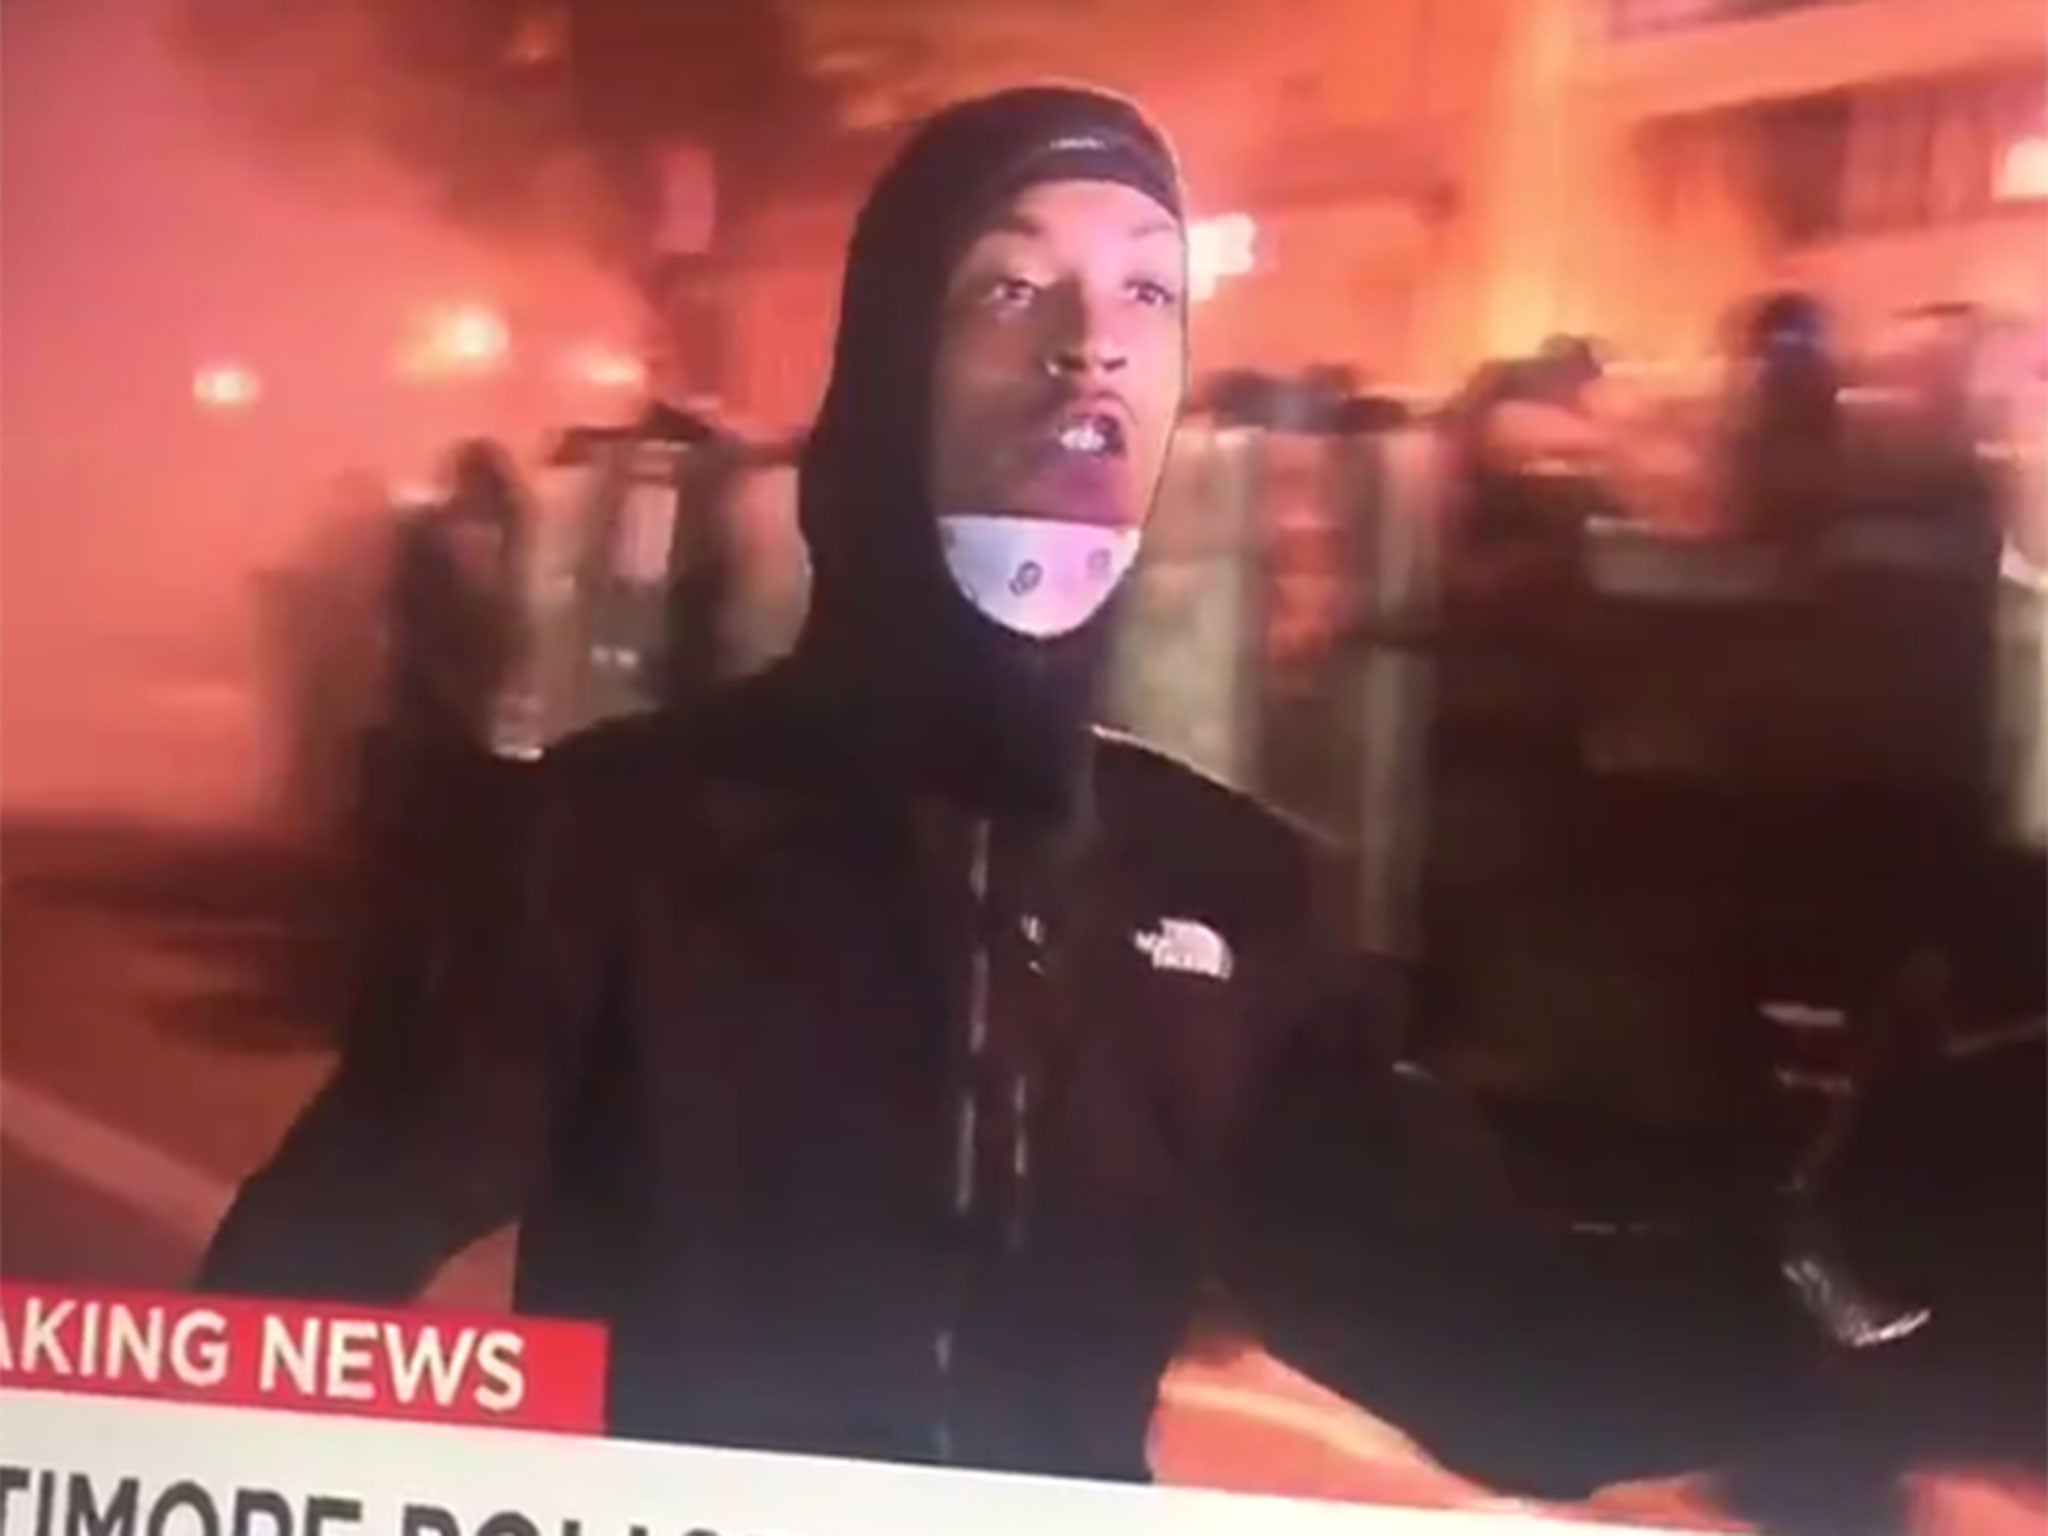 Protest leader Joseph Kent was abducted by police as he addressed crowds live on CNN